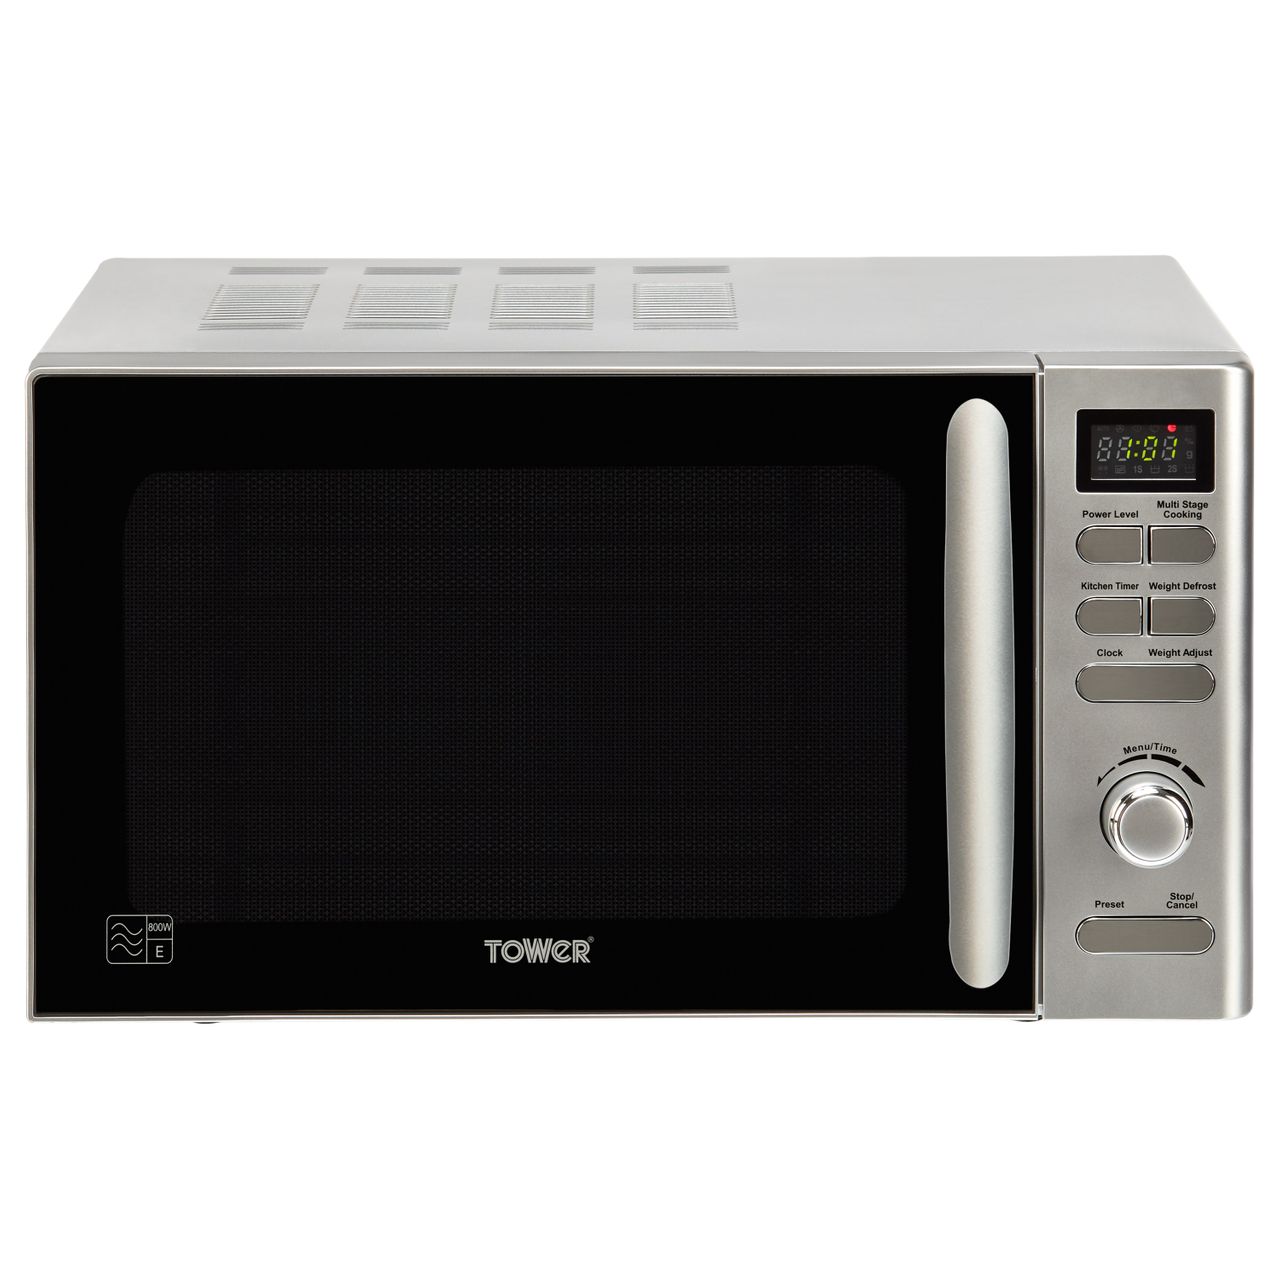 Tower T24019S 20 Litre Microwave Review